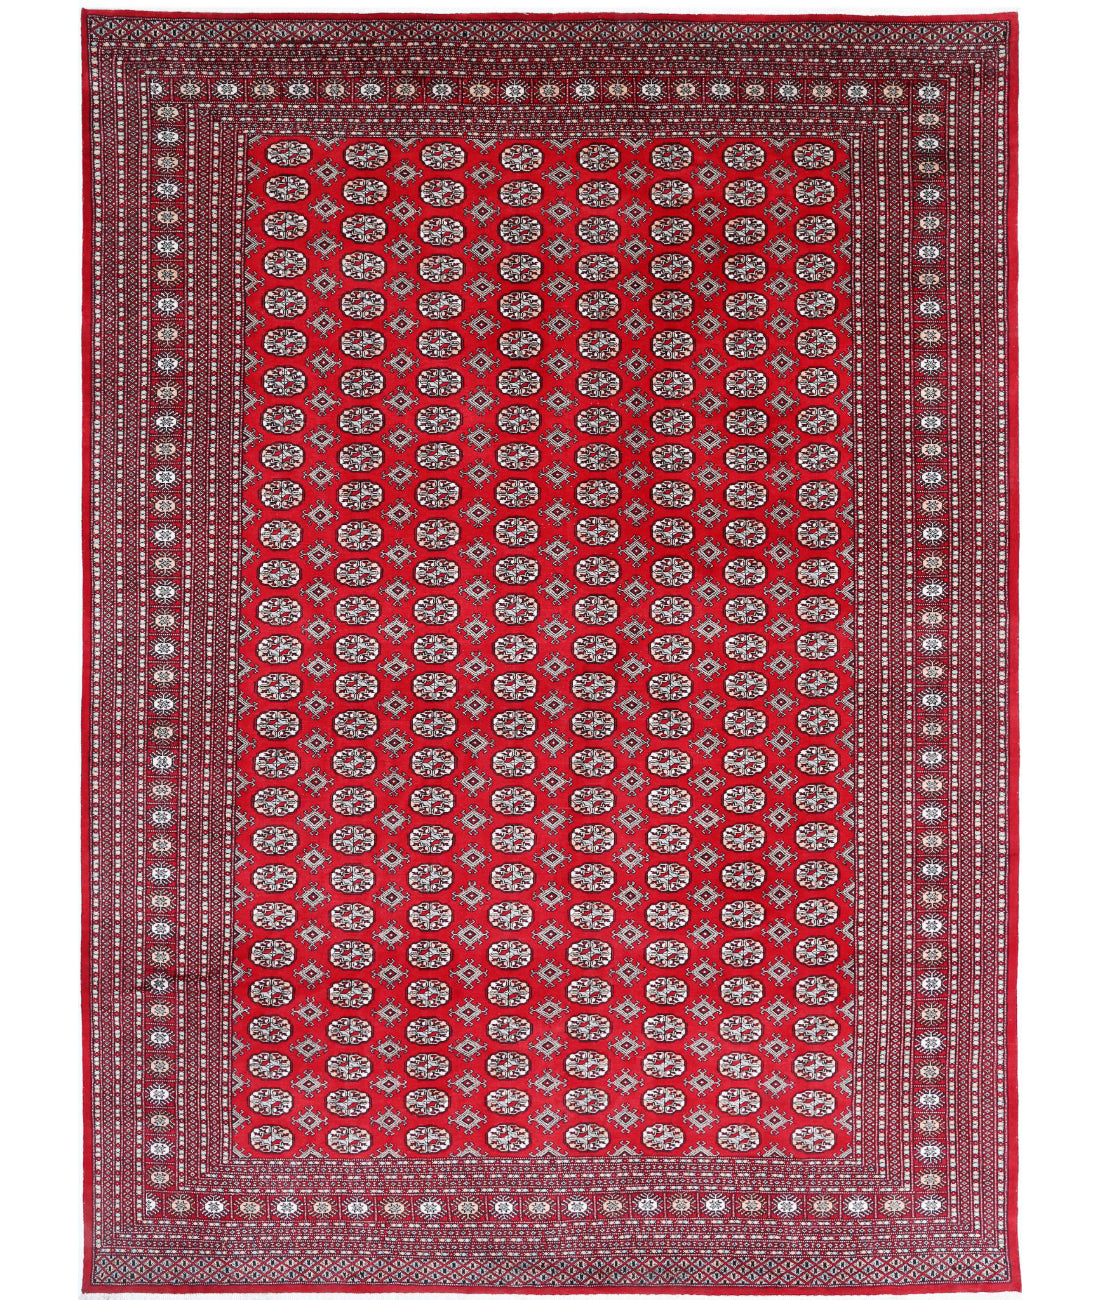 Hand Knotted Tribal Bokhara Wool Rug - 10'2'' x 13'11'' 10'2'' x 13'11'' (305 X 418) / Red / Black